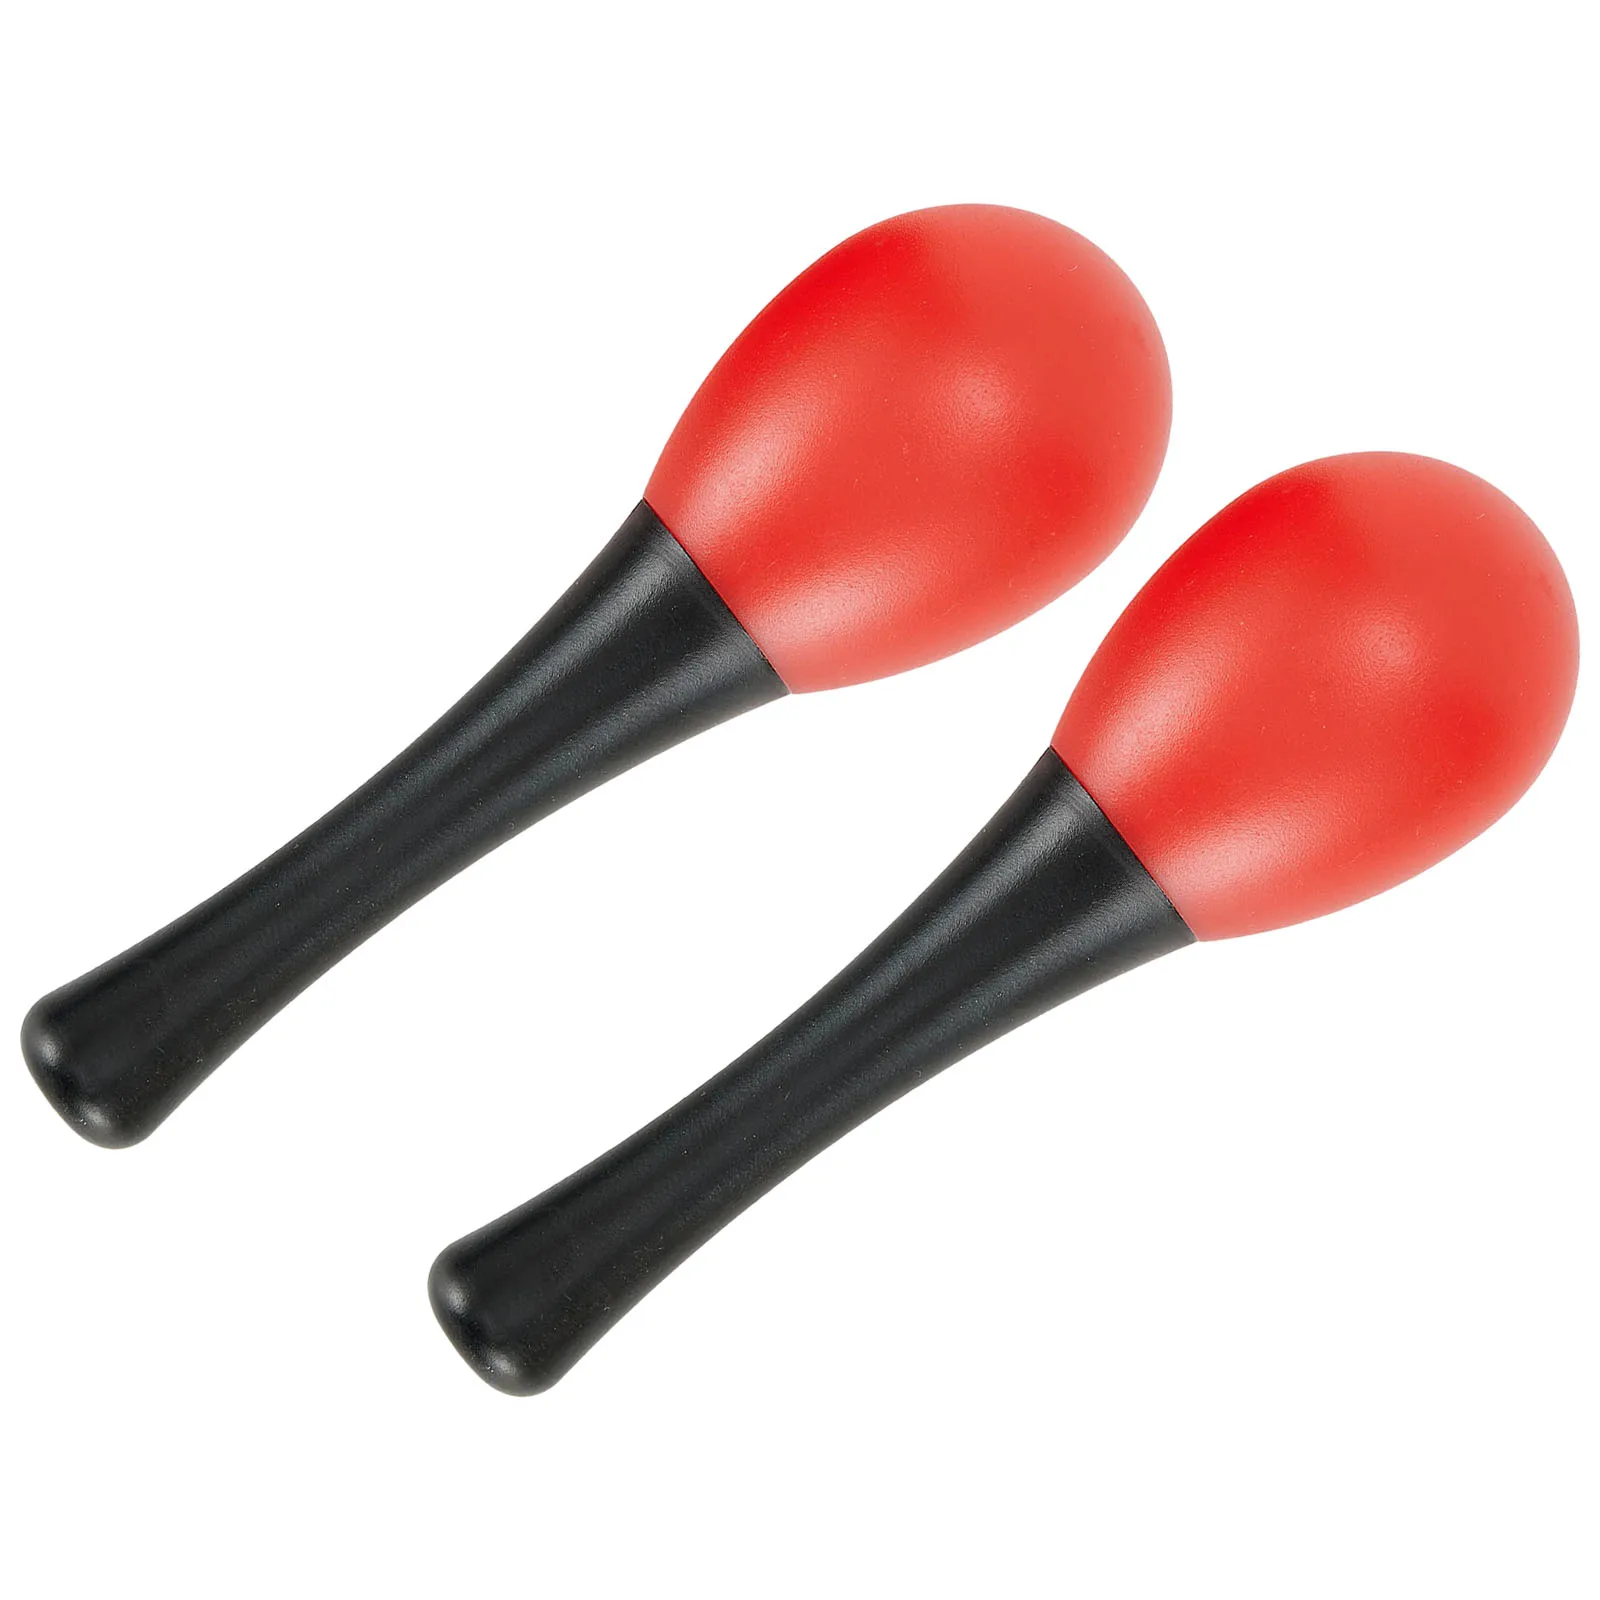 

2X Plastic Maracas Sand Hammer Rattle Shaker Percussion Musical Instruments Toys For Primary Schools Percussion Workshops